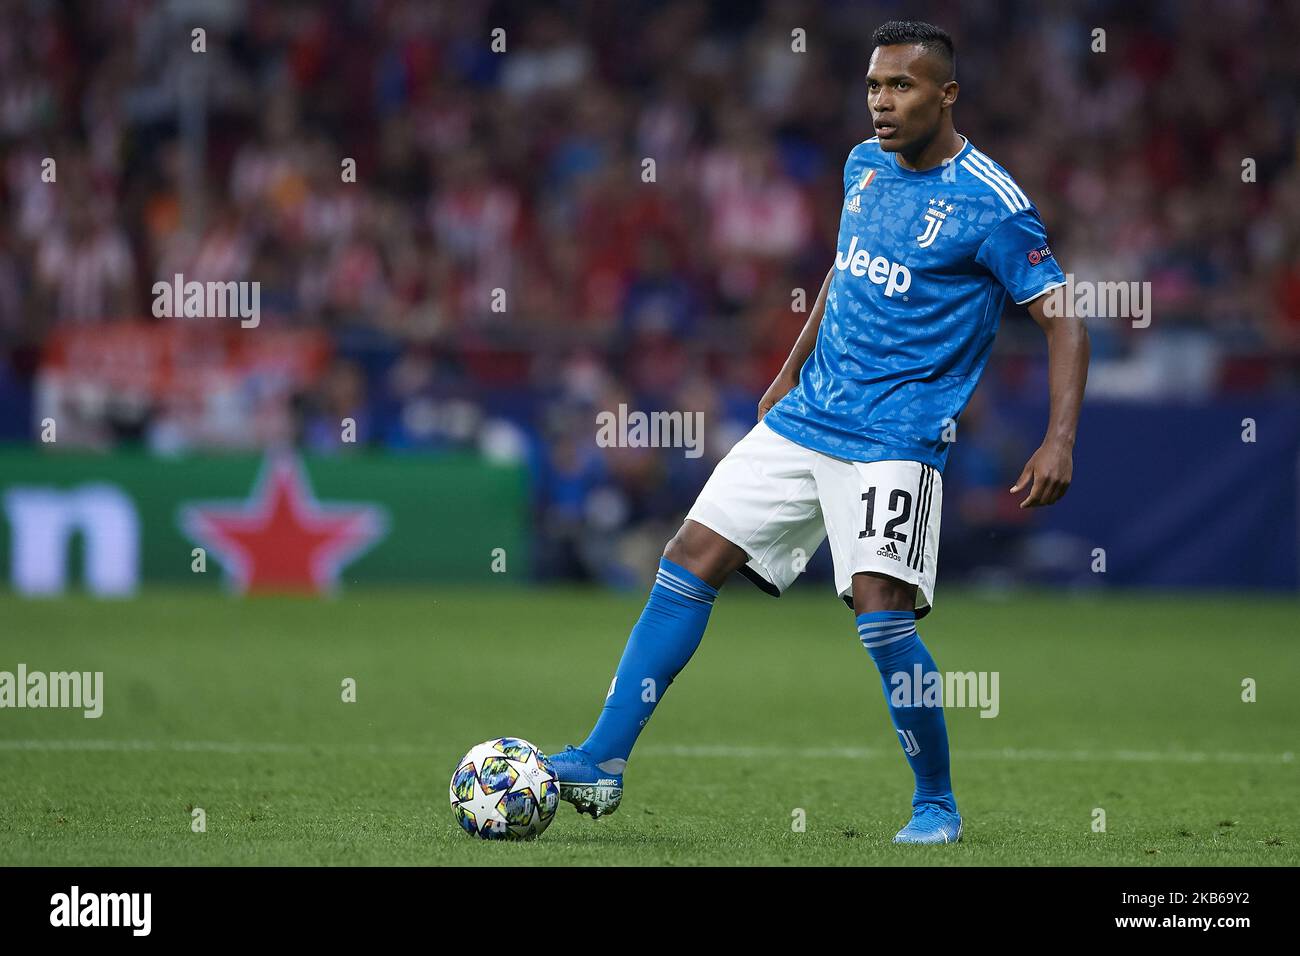 Alex Sandro Lobo Silva of Juventus controls the ball during the UEFA Champions League group D match between Atletico Madrid and Juventus at Wanda Metropolitano on September 18, 2019 in Madrid, Spain. (Photo by Jose Breton/Pics Action/NurPhoto) Stock Photo